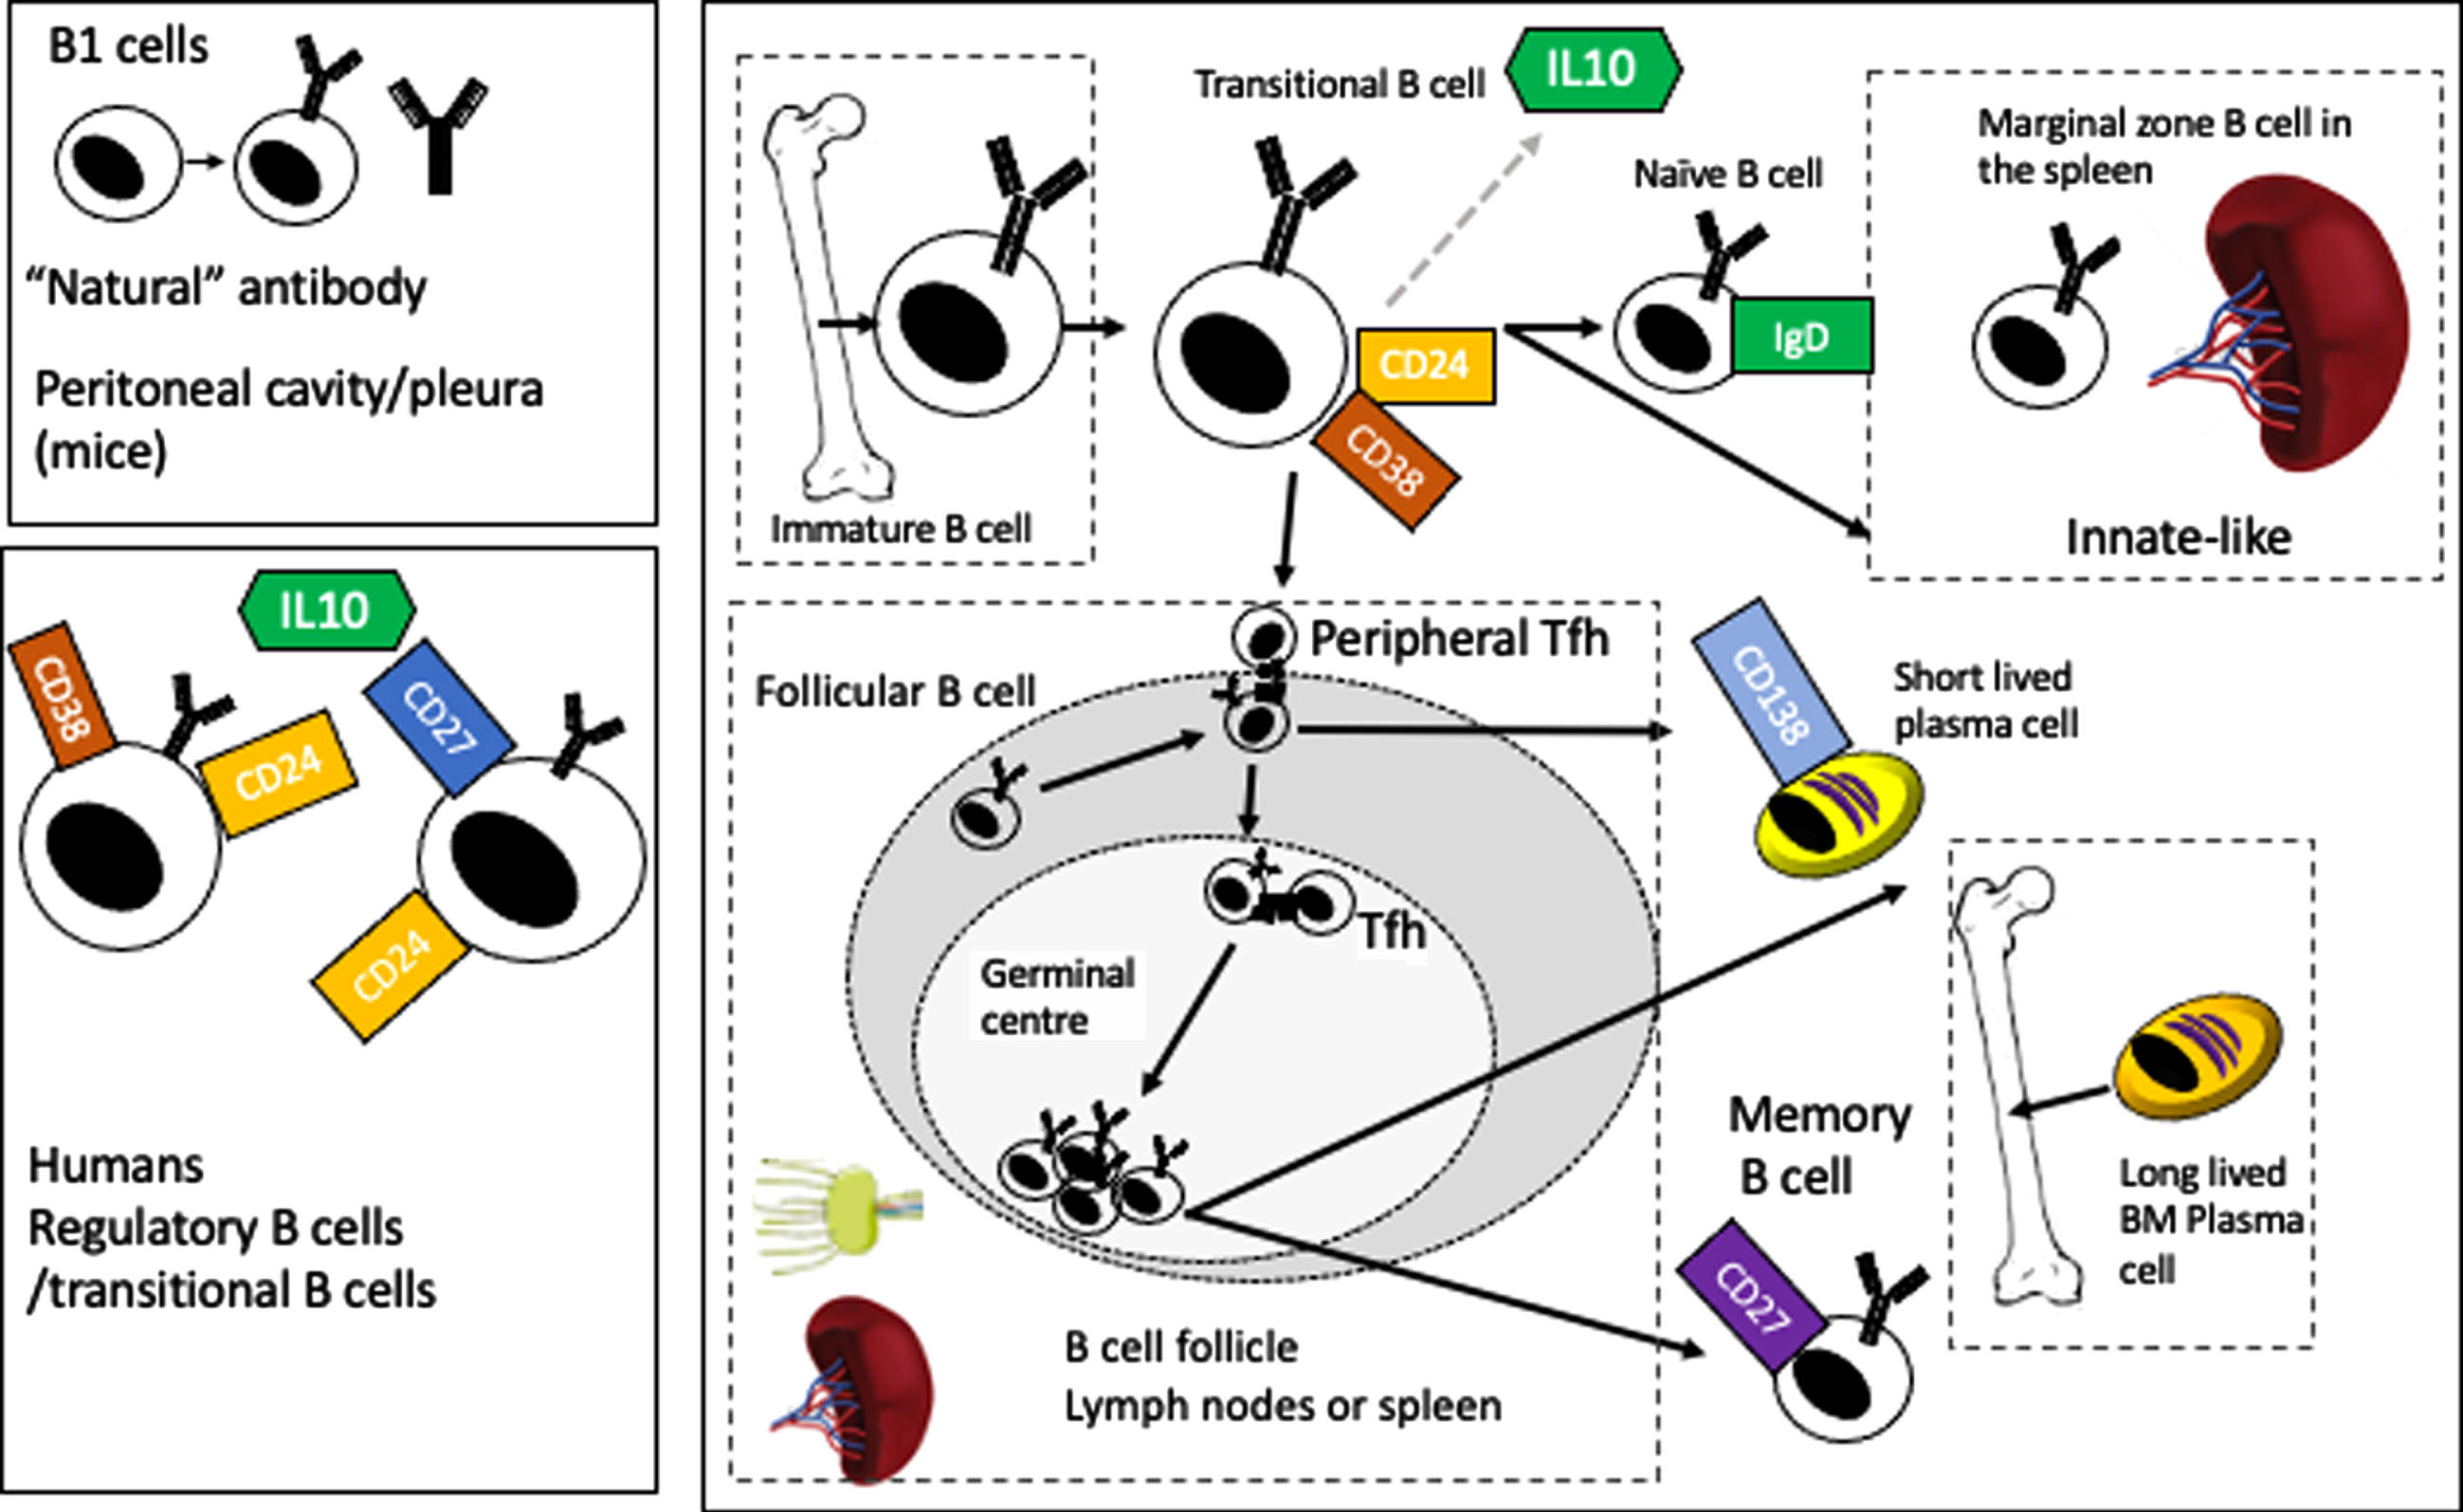 Overview of B cell development and maturation.